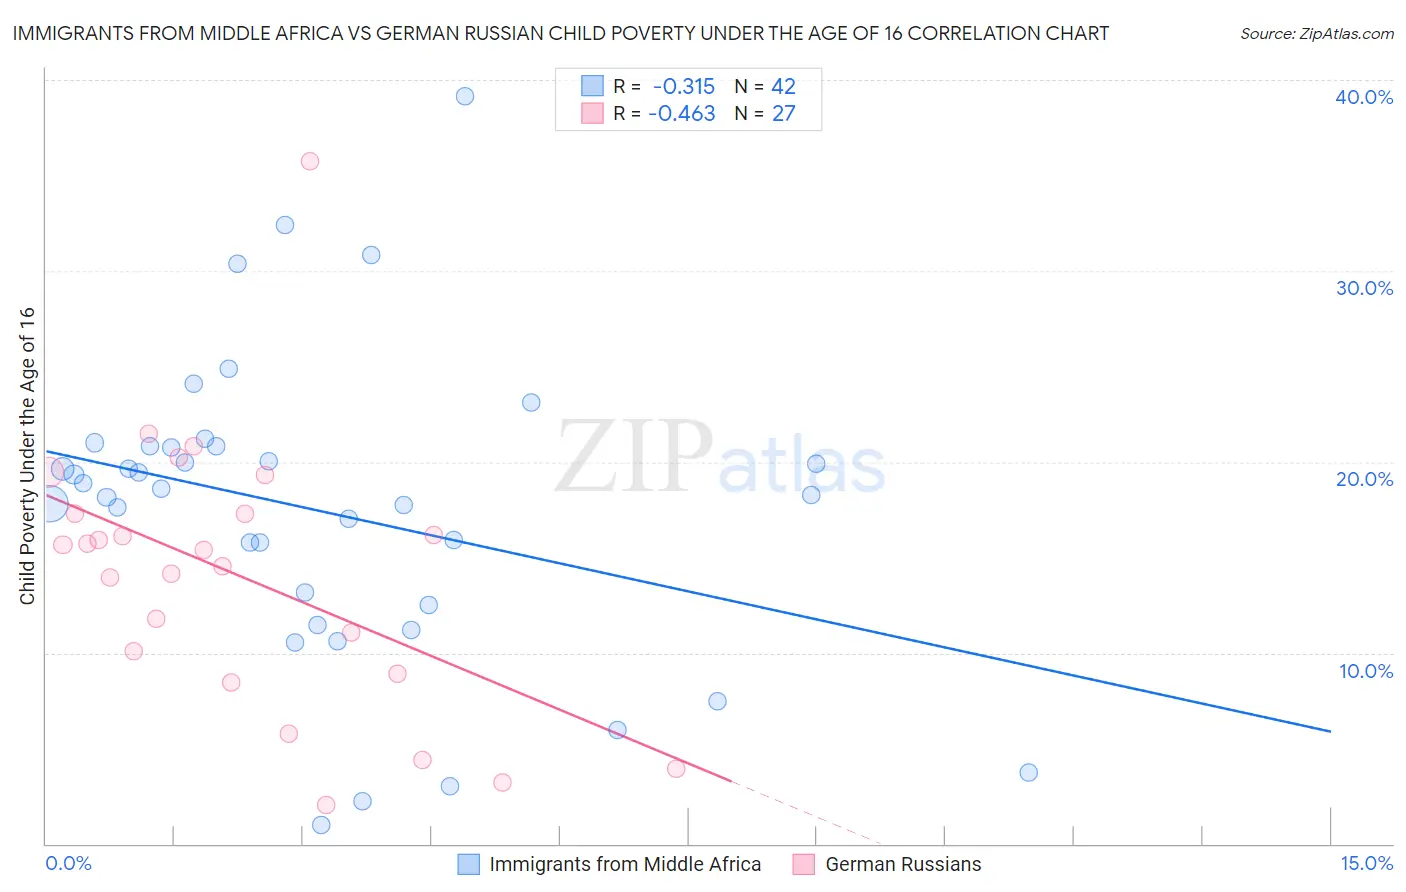 Immigrants from Middle Africa vs German Russian Child Poverty Under the Age of 16